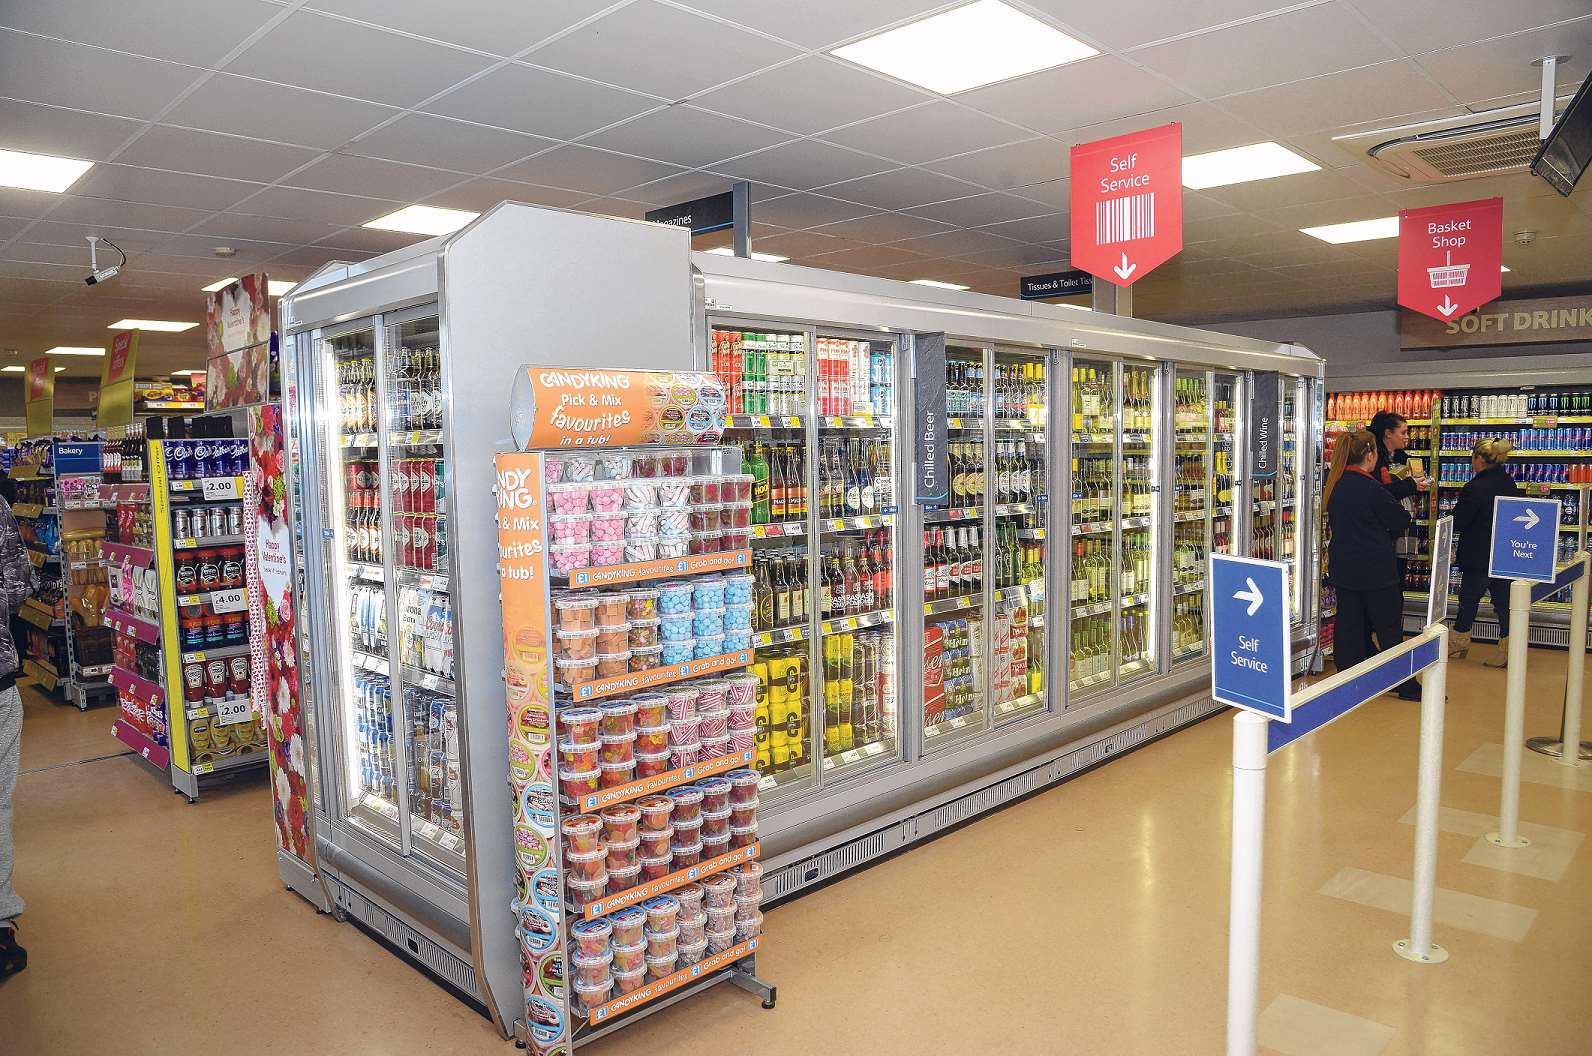 The Tesco Express in Mace Lane recently underwent a major internal revamp